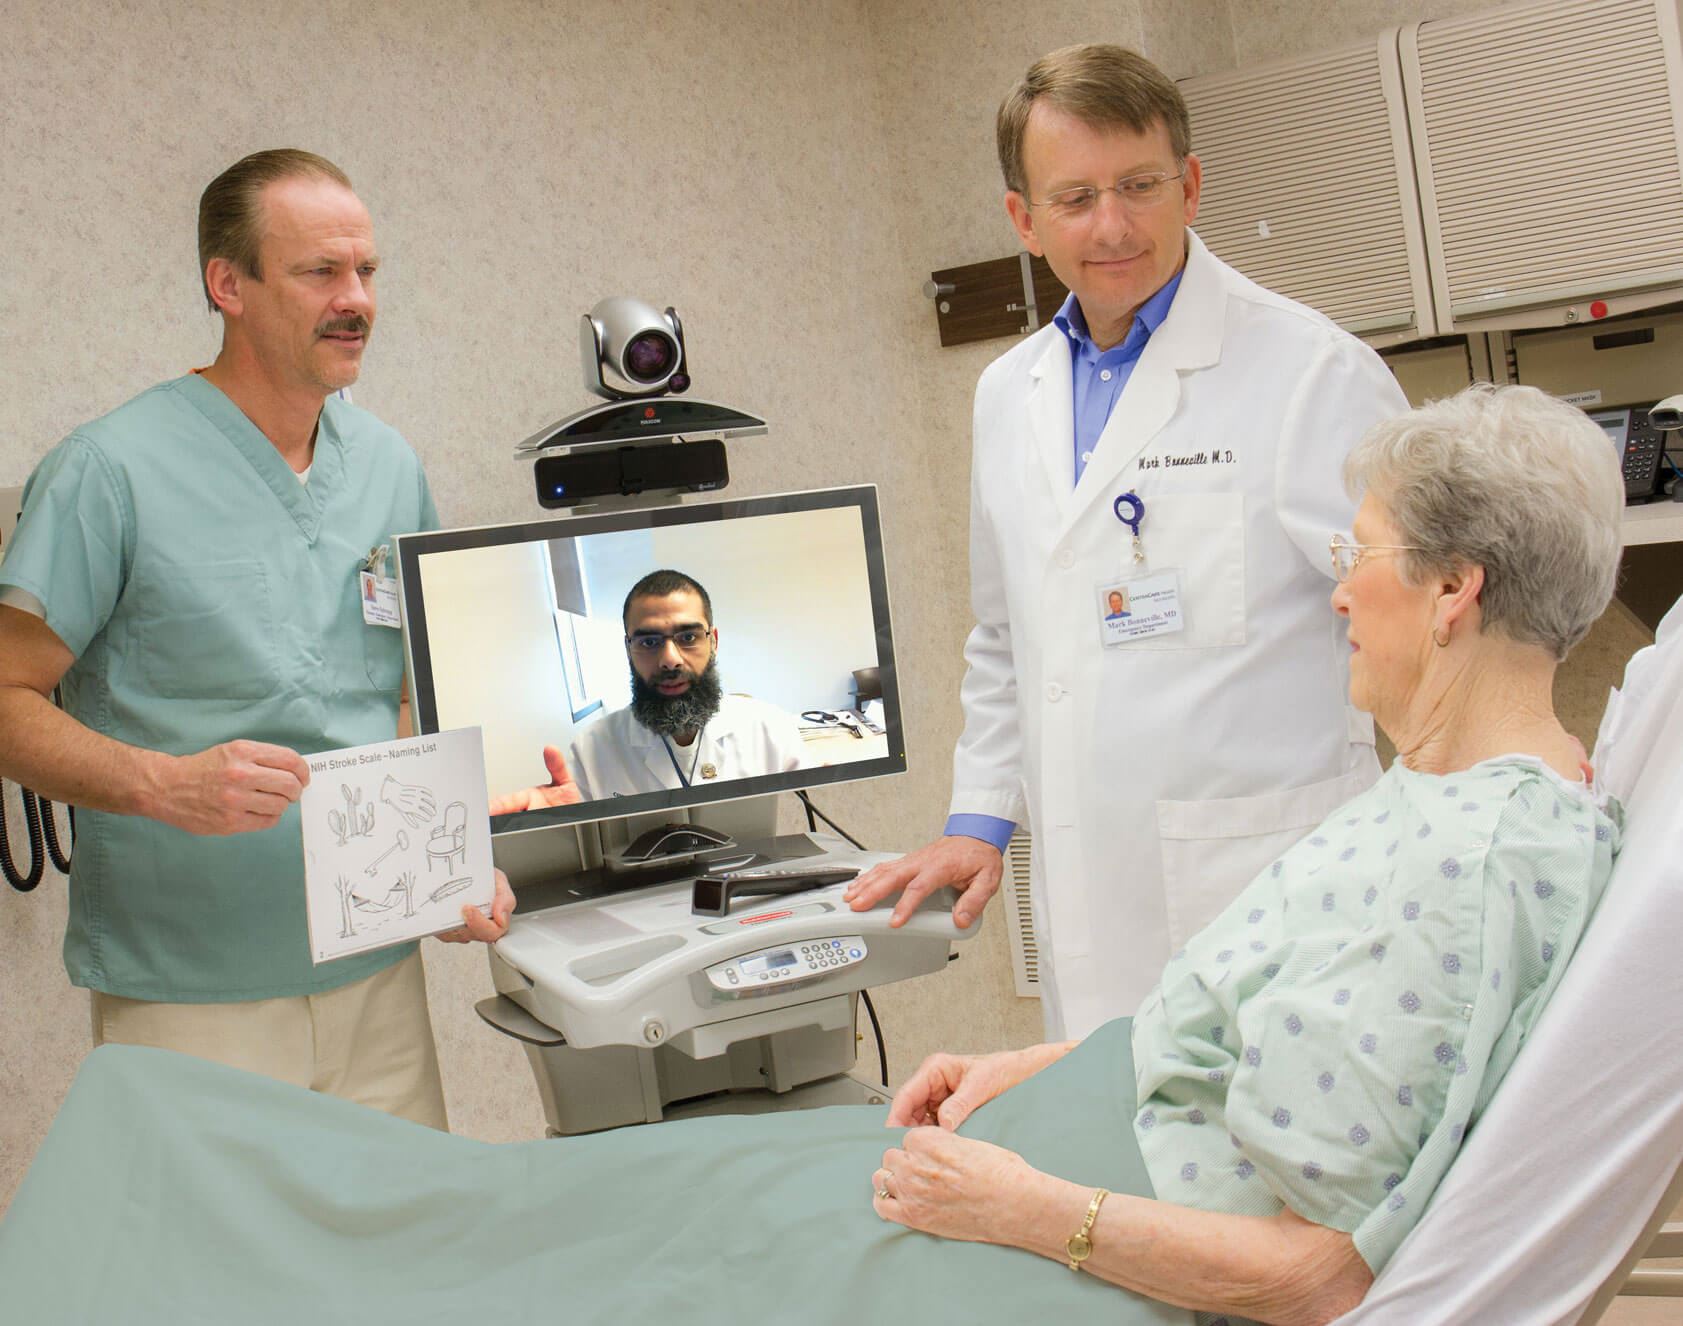 Patient speaking to physician on monitor